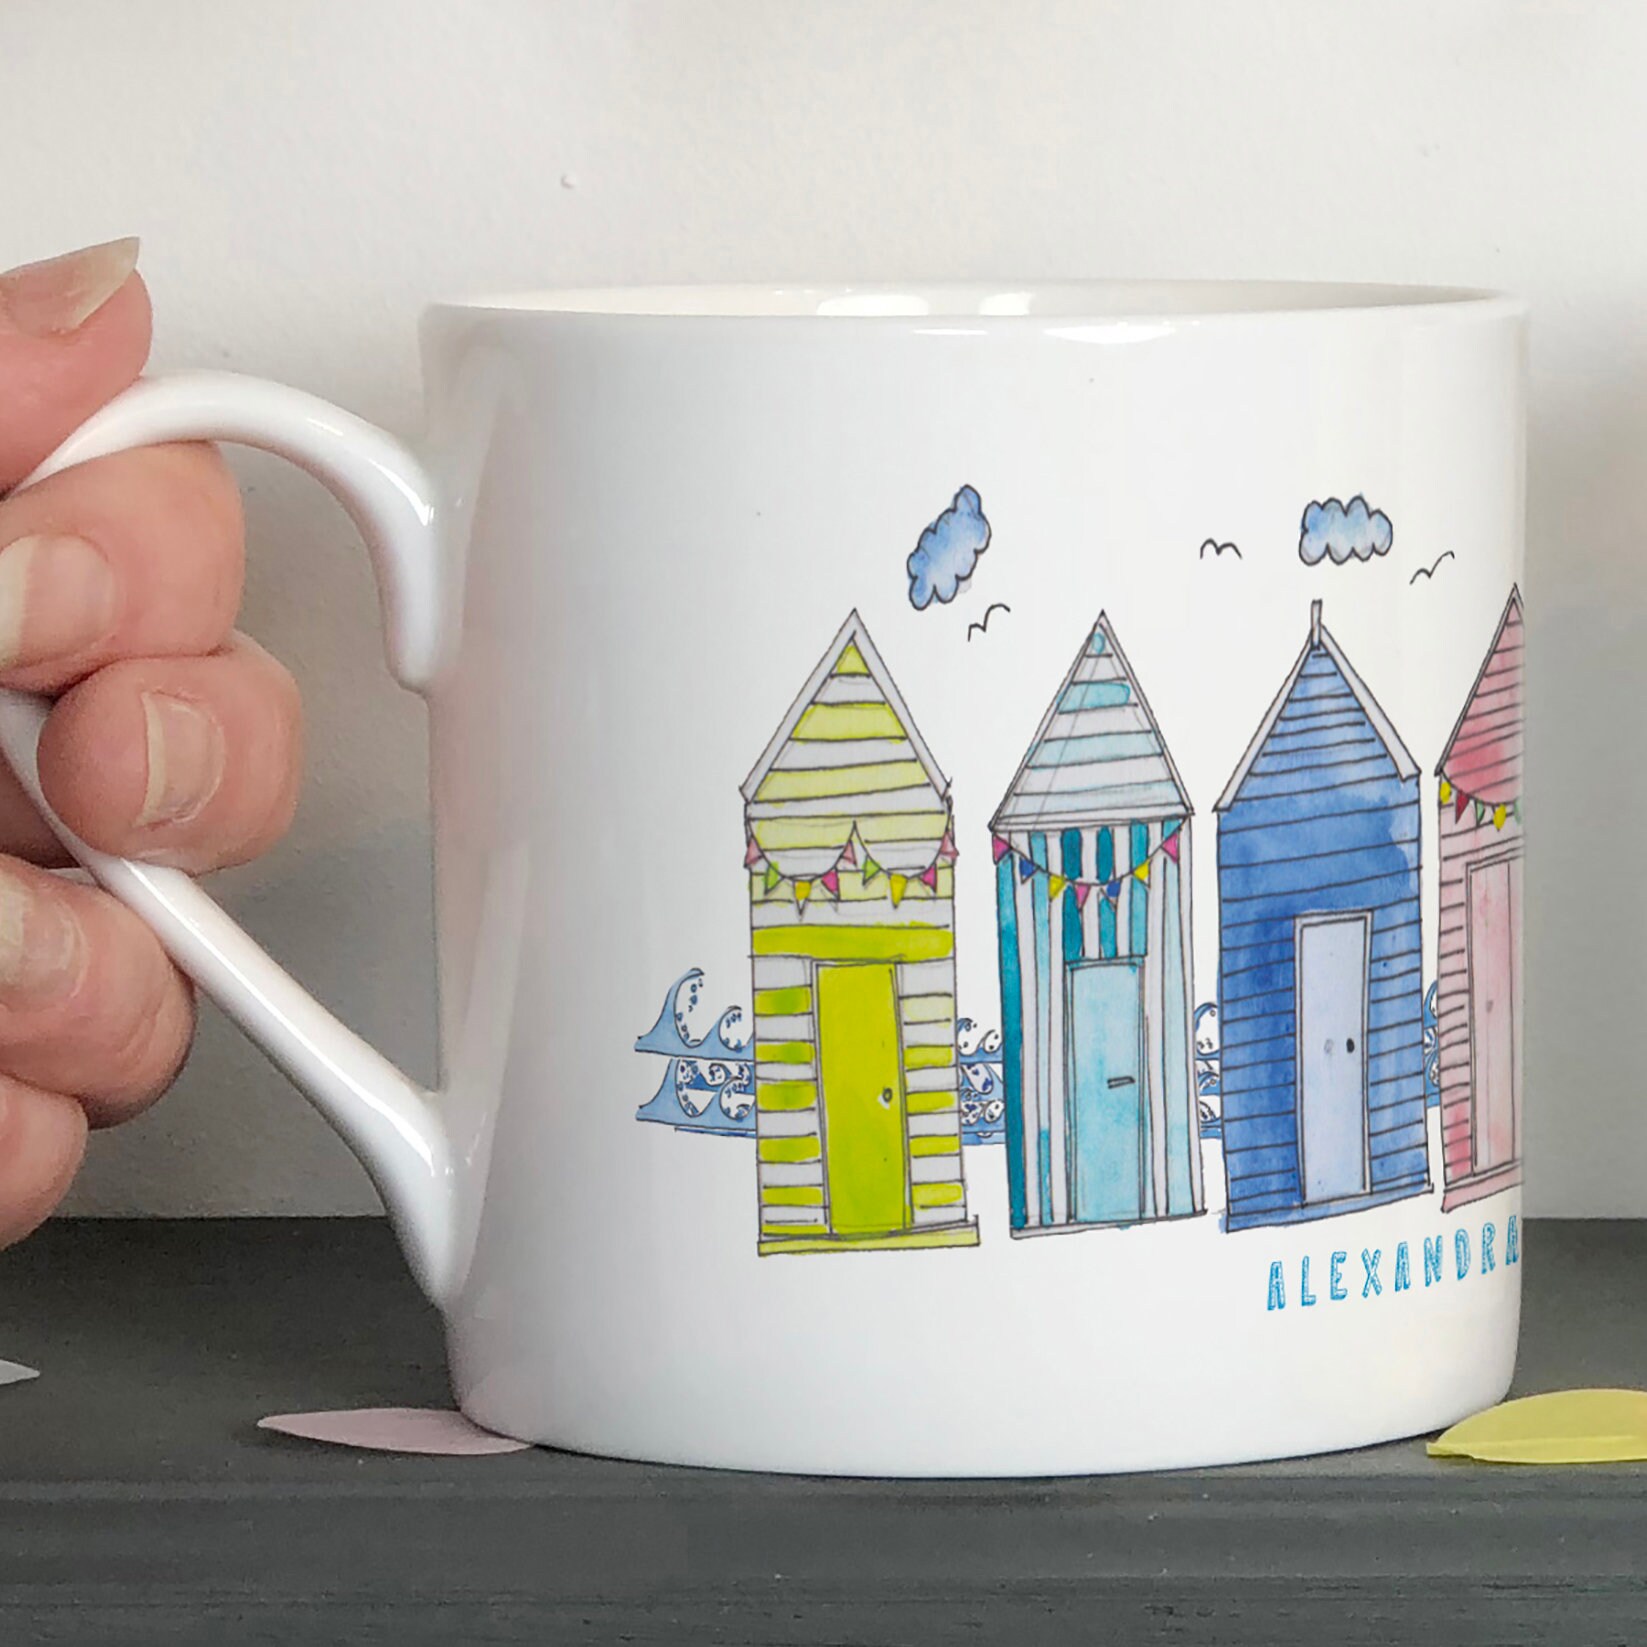 Pair NEW 1 2 or Set of 4 Four Take Me To The Beach / Beach Huts Picture Mugs